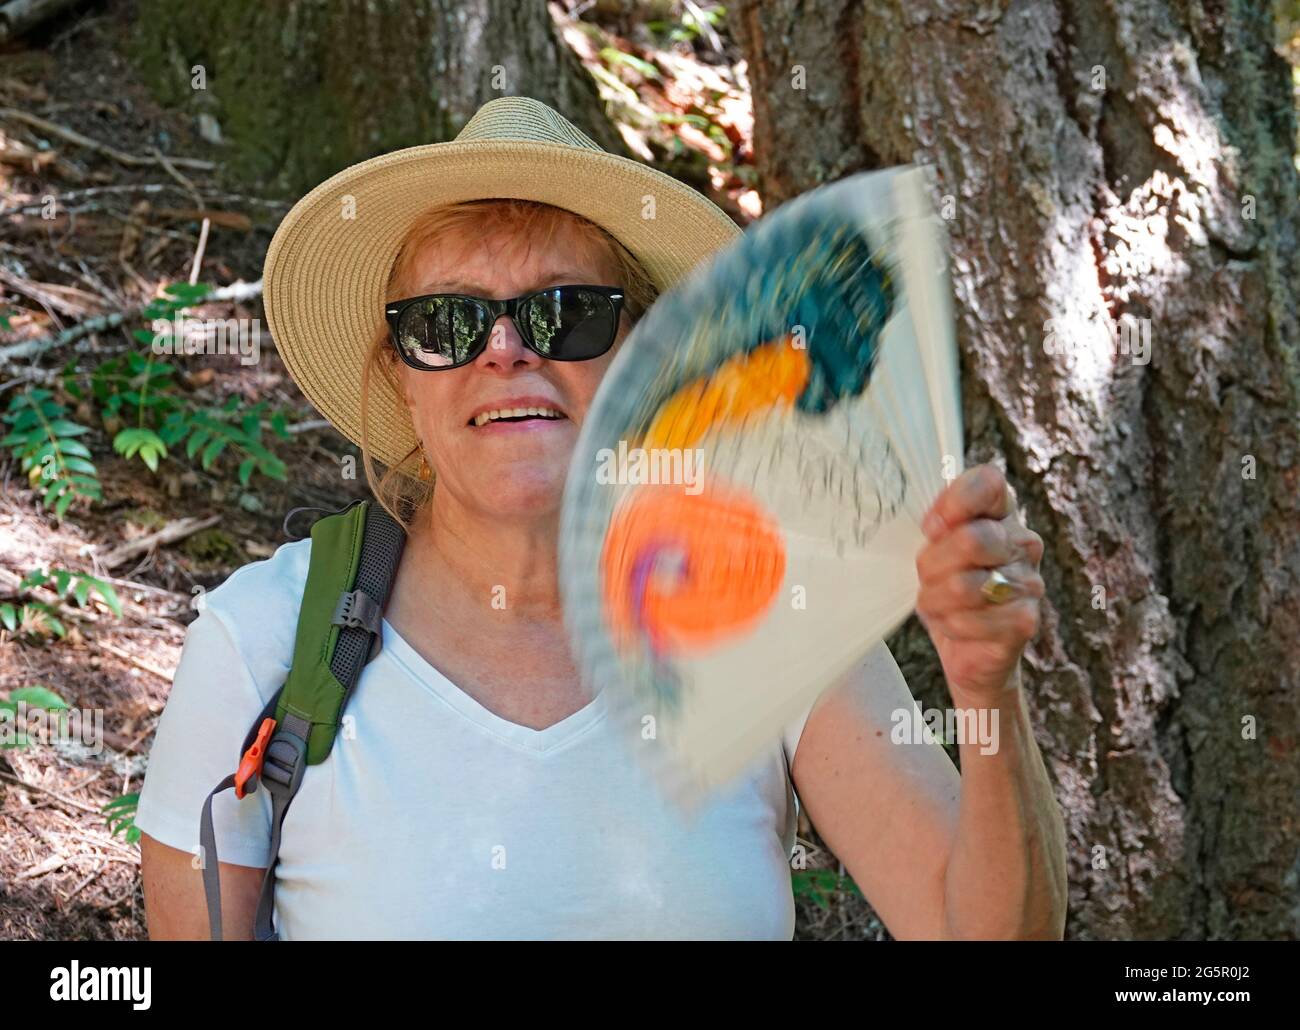 A middle-aged senior citizen using a fan to cool herself while hiking in the Cascade Mountains of central Oregon. Stock Photo